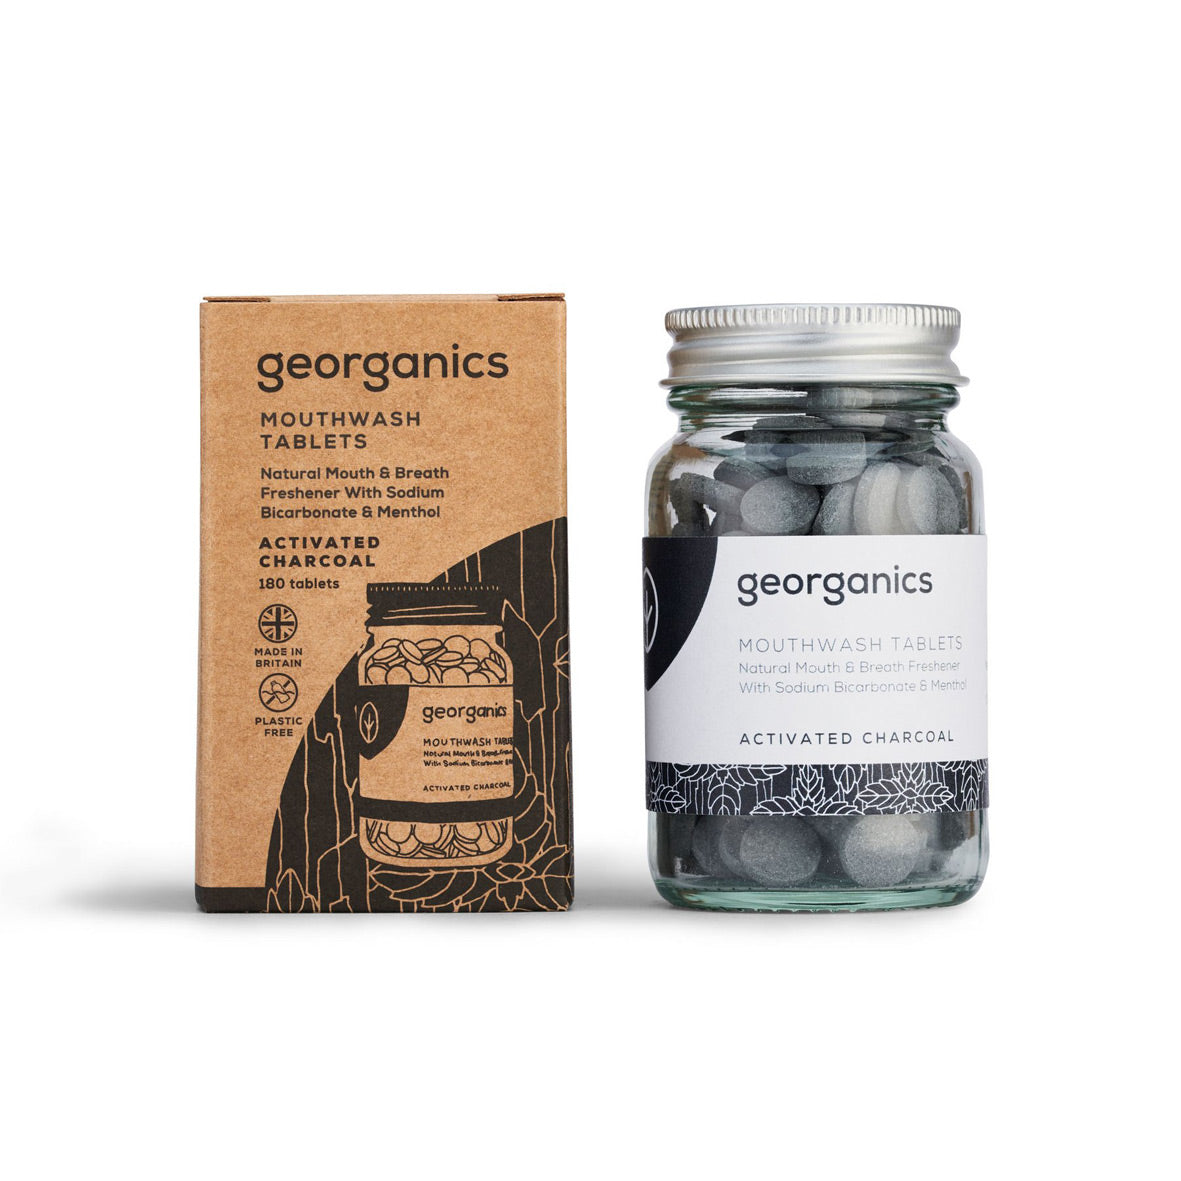 Georganics Mouthwash Tablets Charcoal with Packaging